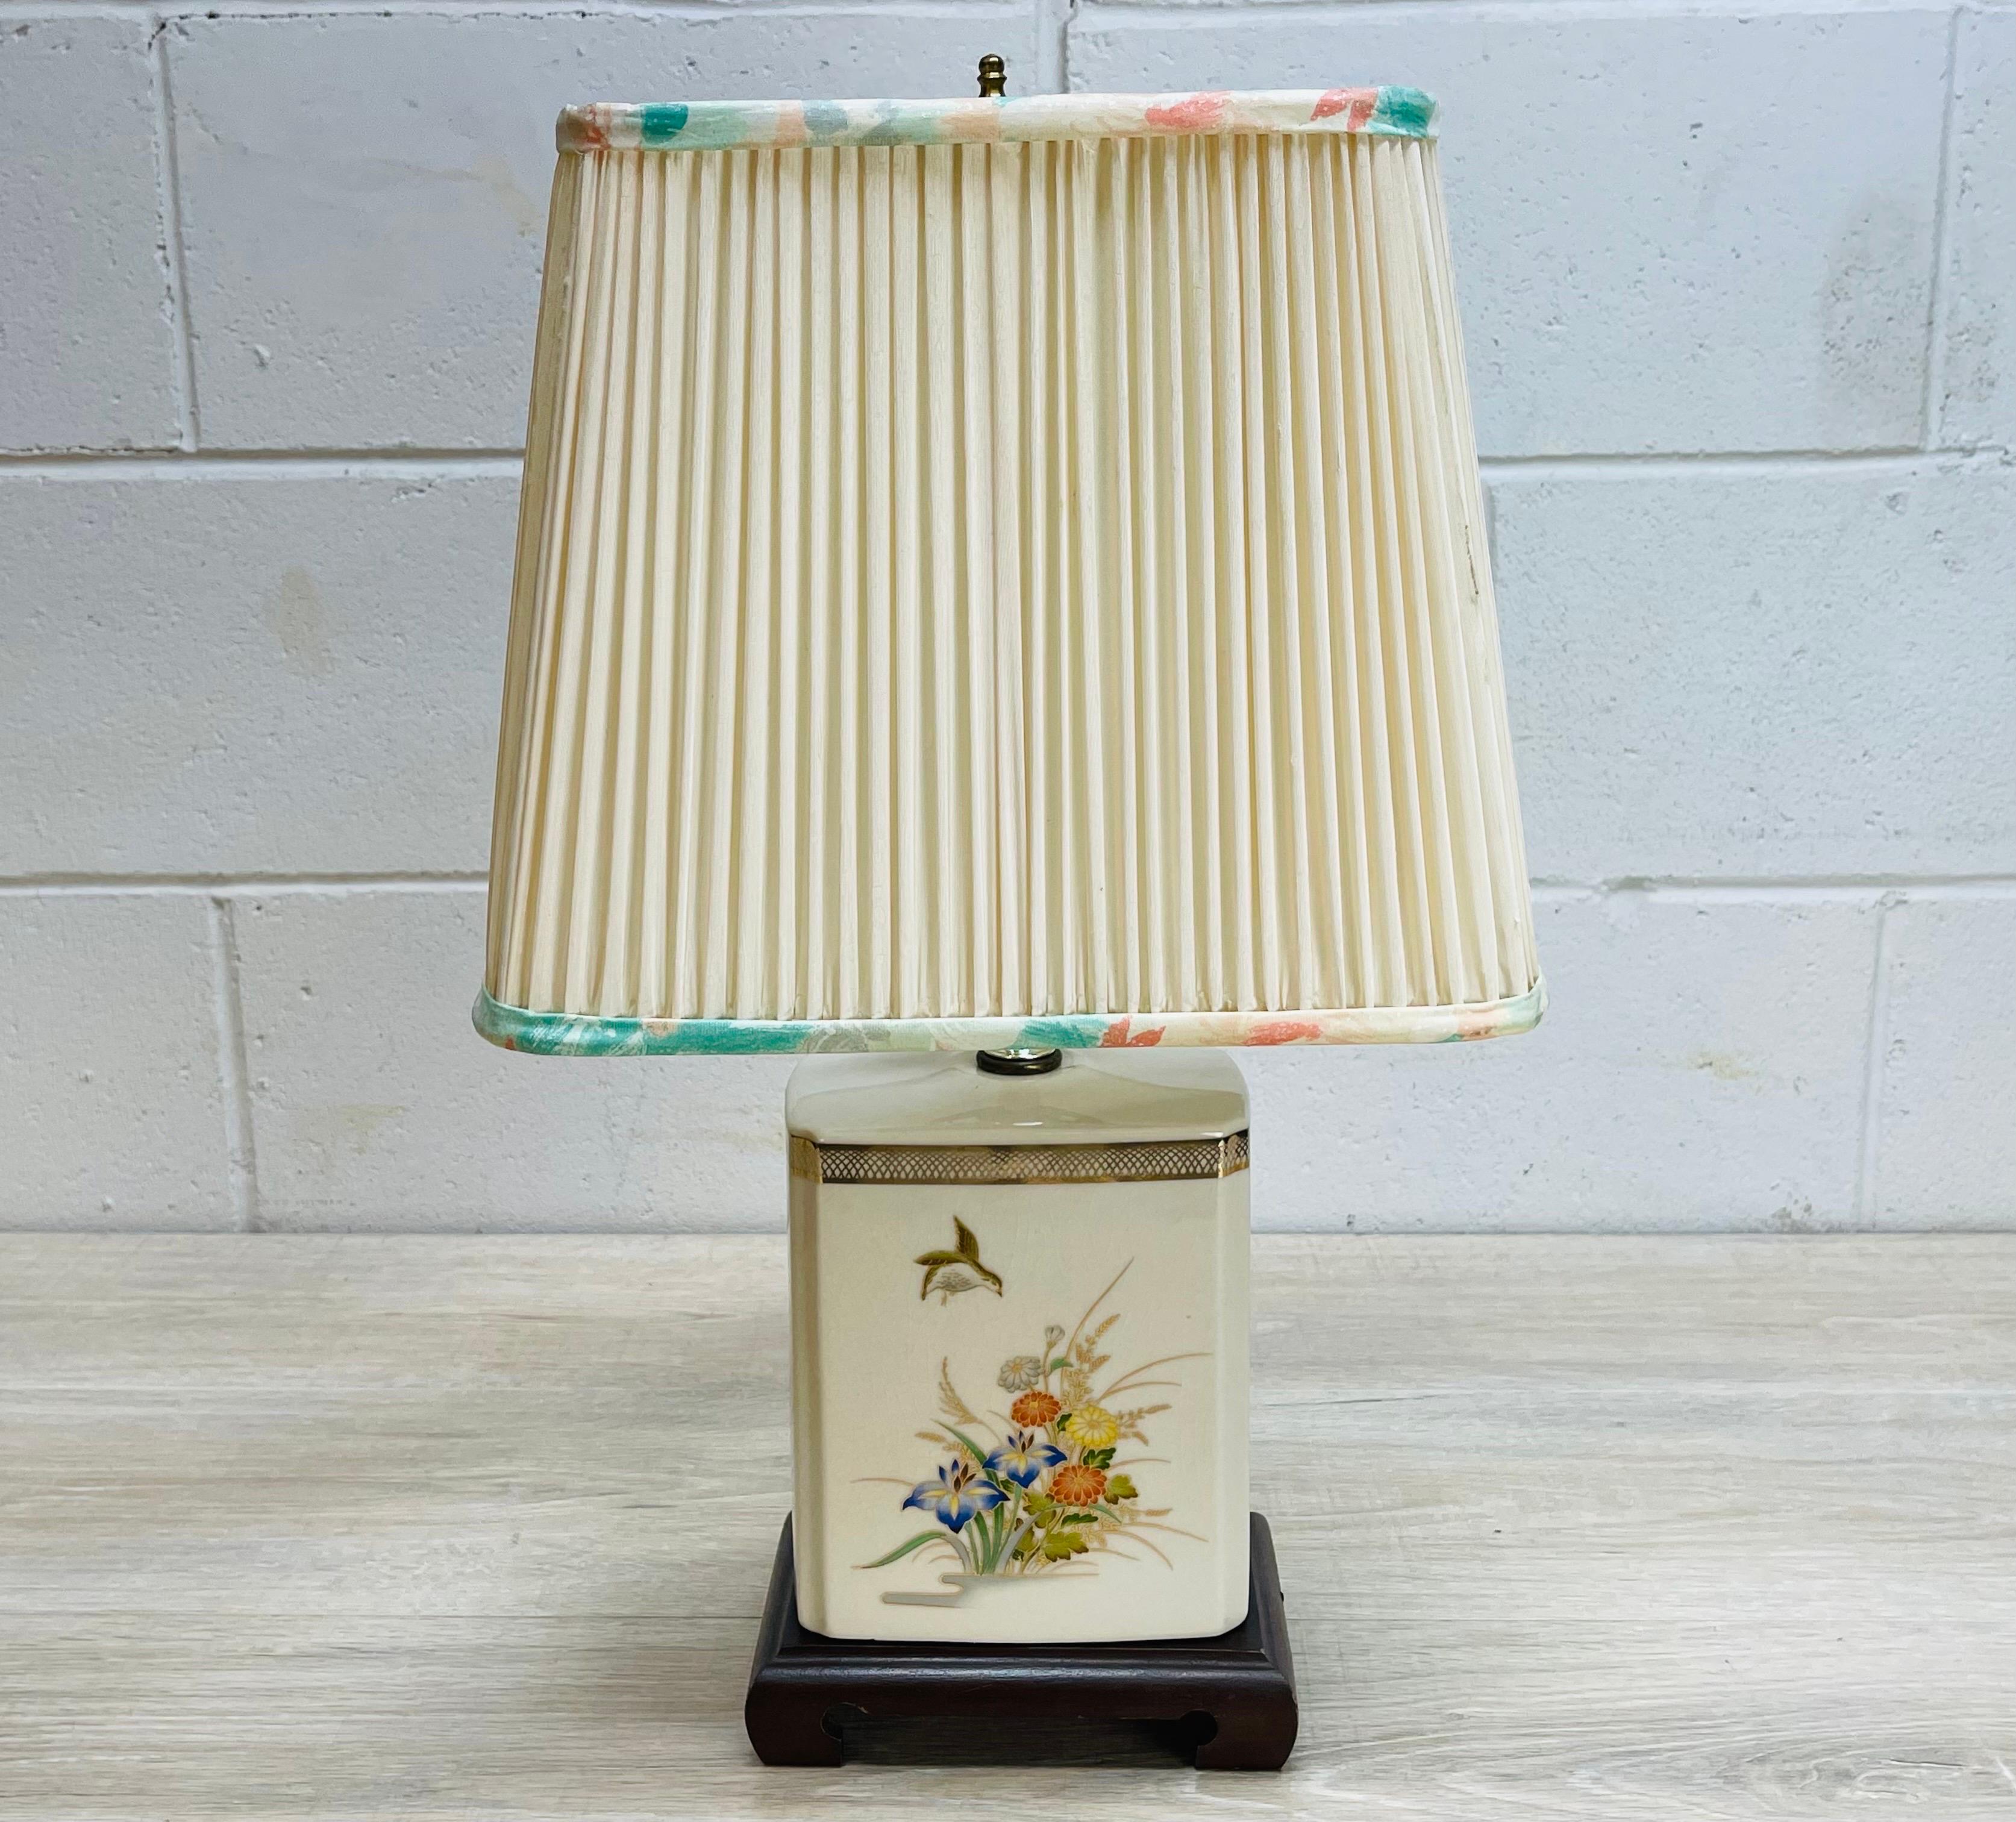 Vintage 1980s floral ceramic Asian style table by Murray Feiss. The lamp comes with the matching shade. Wired for the US and in working condition. Shade measures 12” x 8” x 10”. Socket, 13” H. Harp, 4.5” diameter x 7” height. Marked.